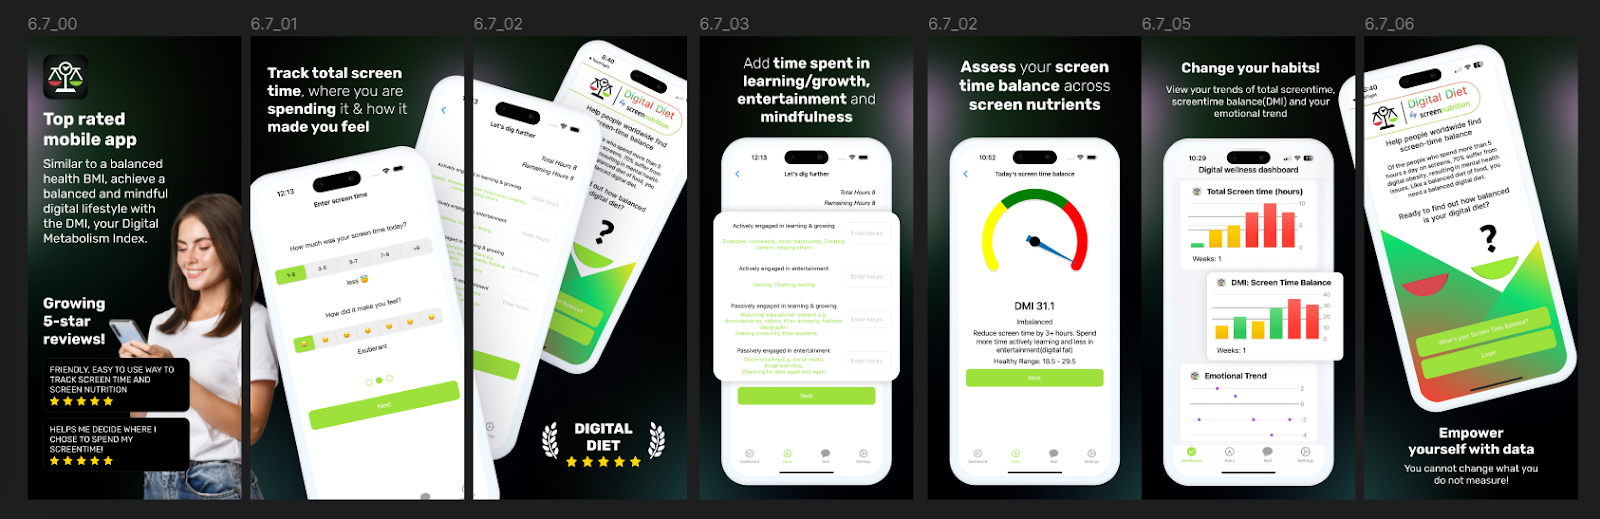 Screen Nutrition Launches “Digital Diet” mobile app: A Lifelong Journey to Balance in a Digital World